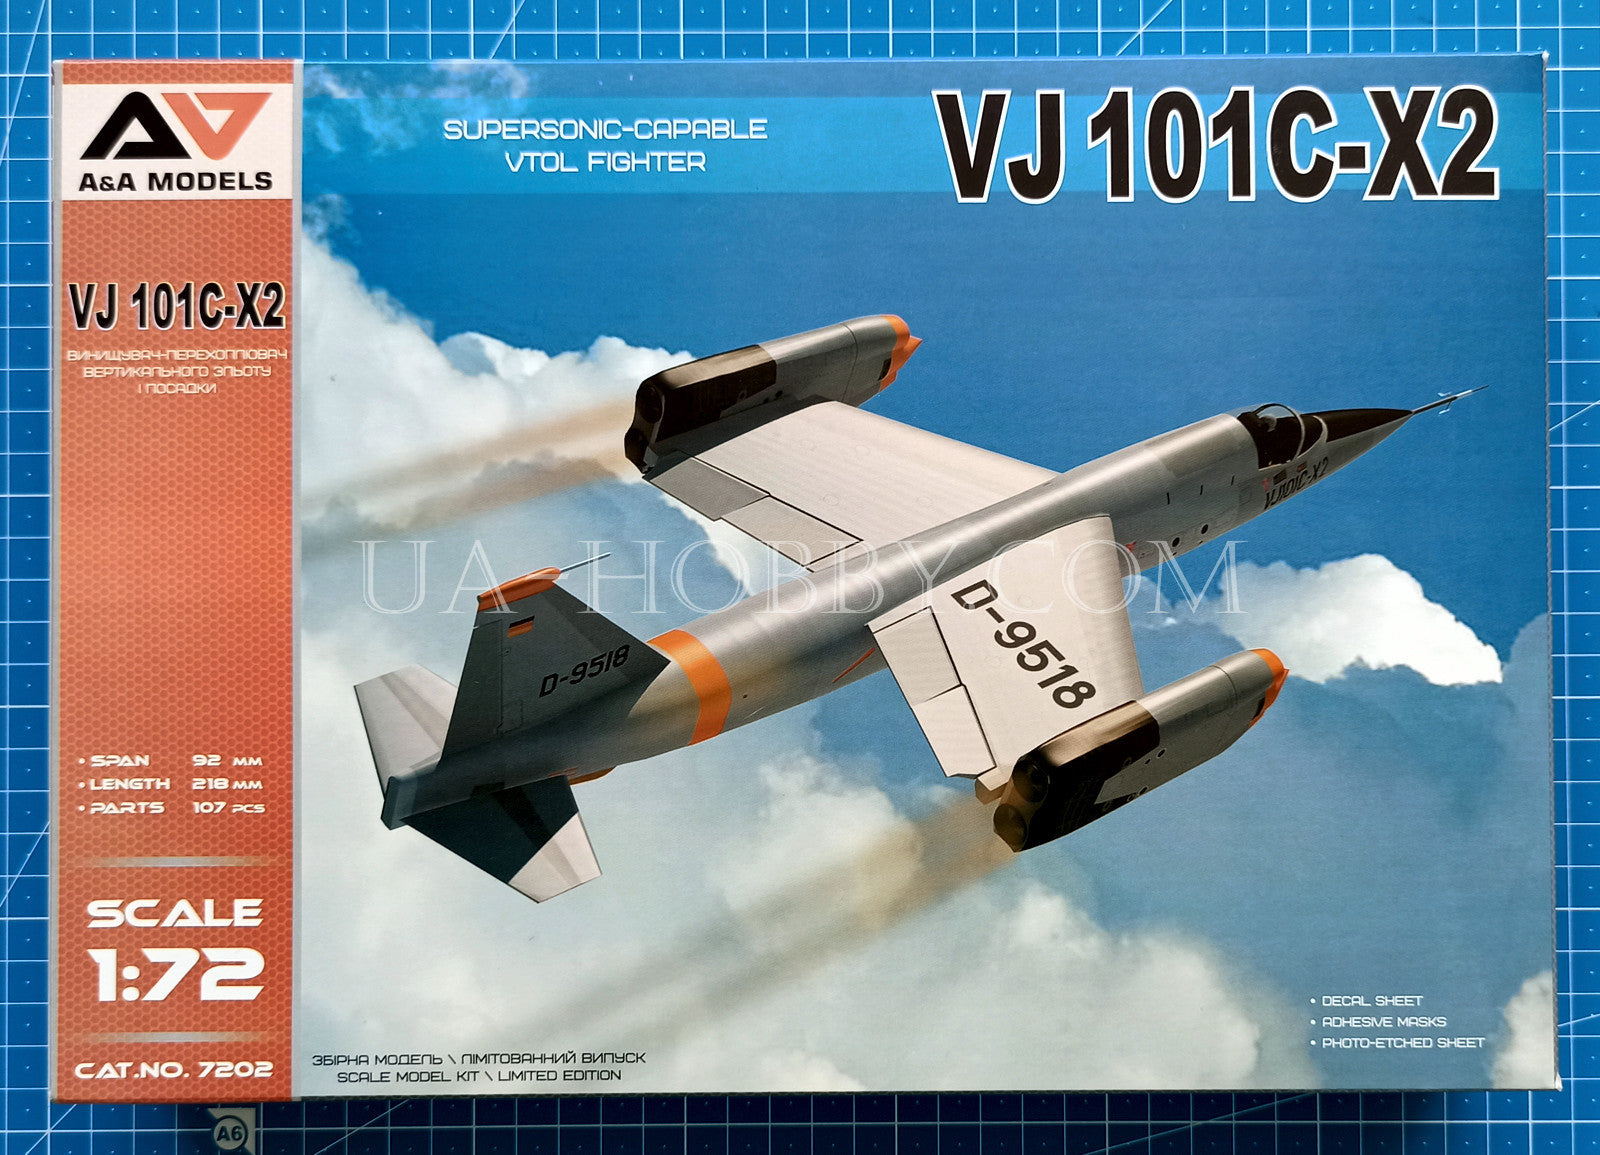 1/72 VJ101C-X2 Supersonic capable VTOL fighter. A&A Models 7202